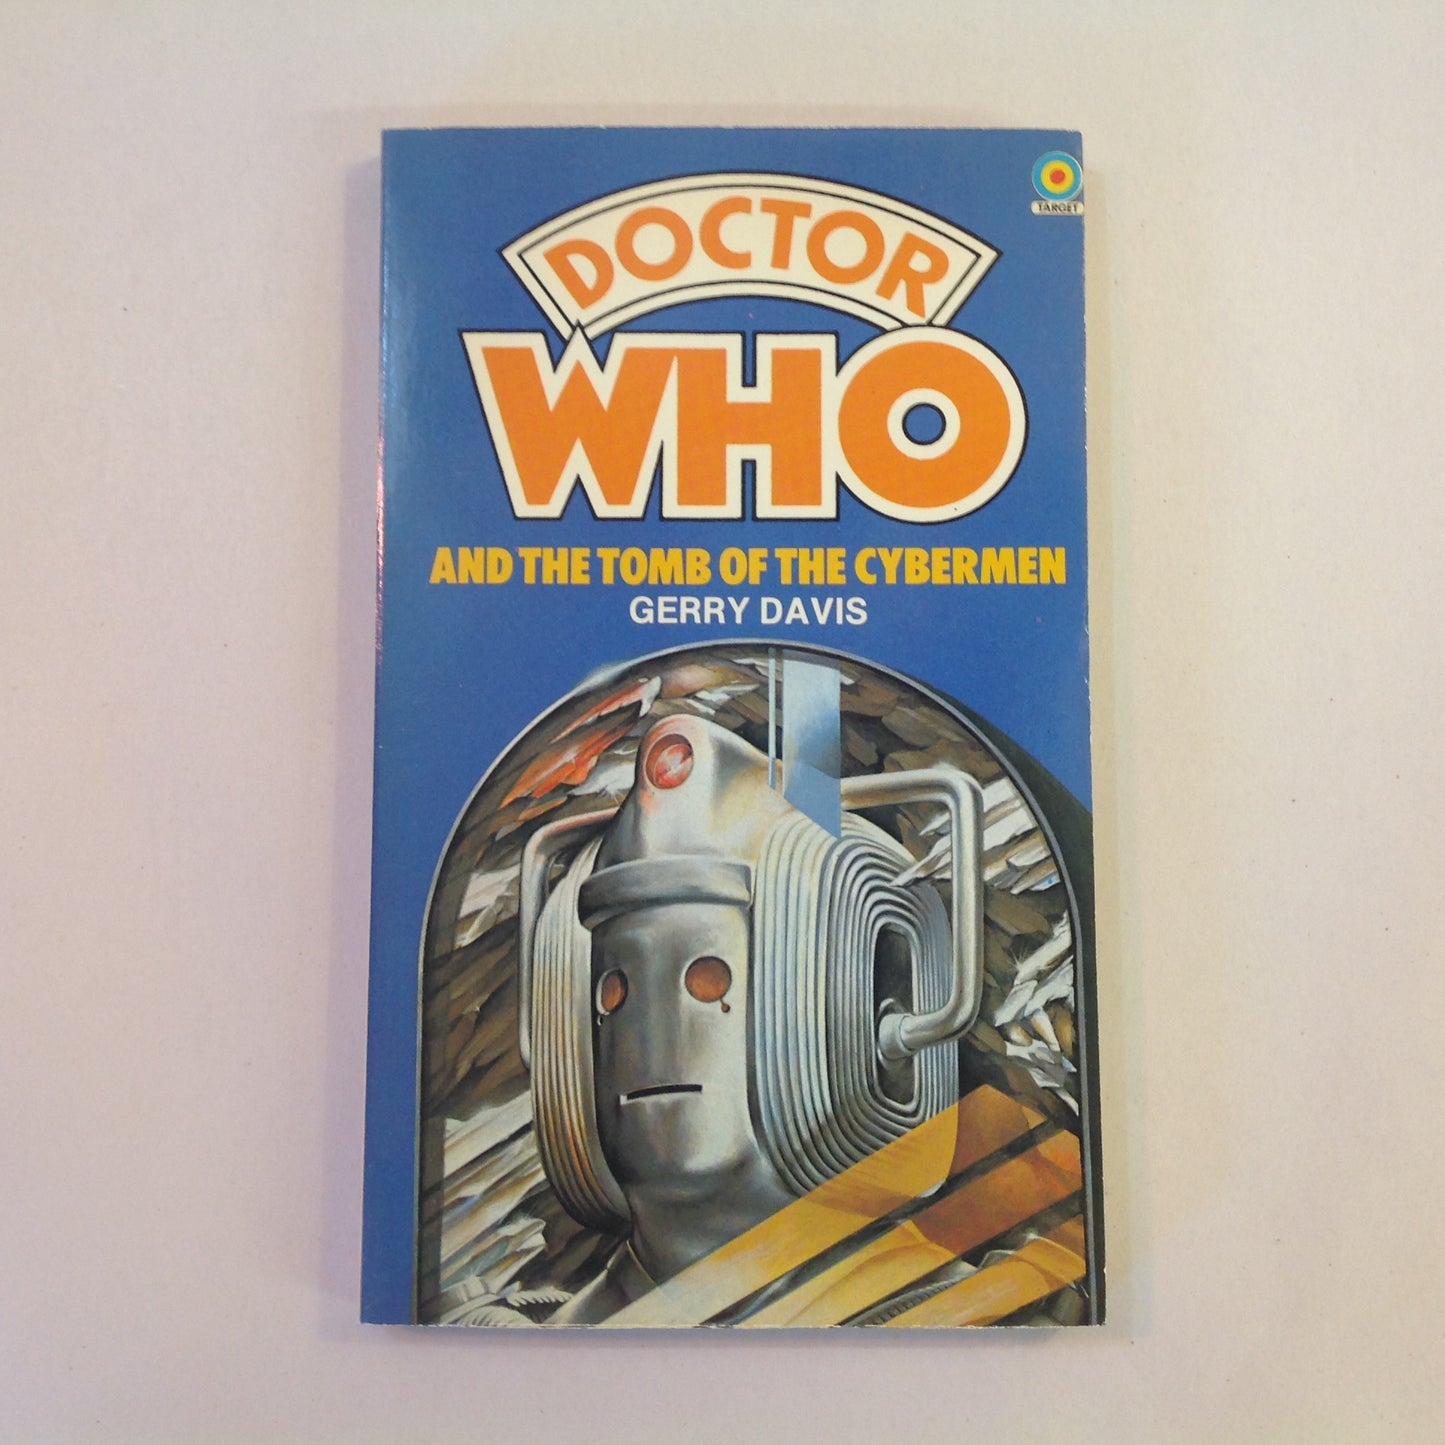 Vintage 1981 Mass Market Paperback Doctor Who and the Tomb of the Cybermen Gerry Davis